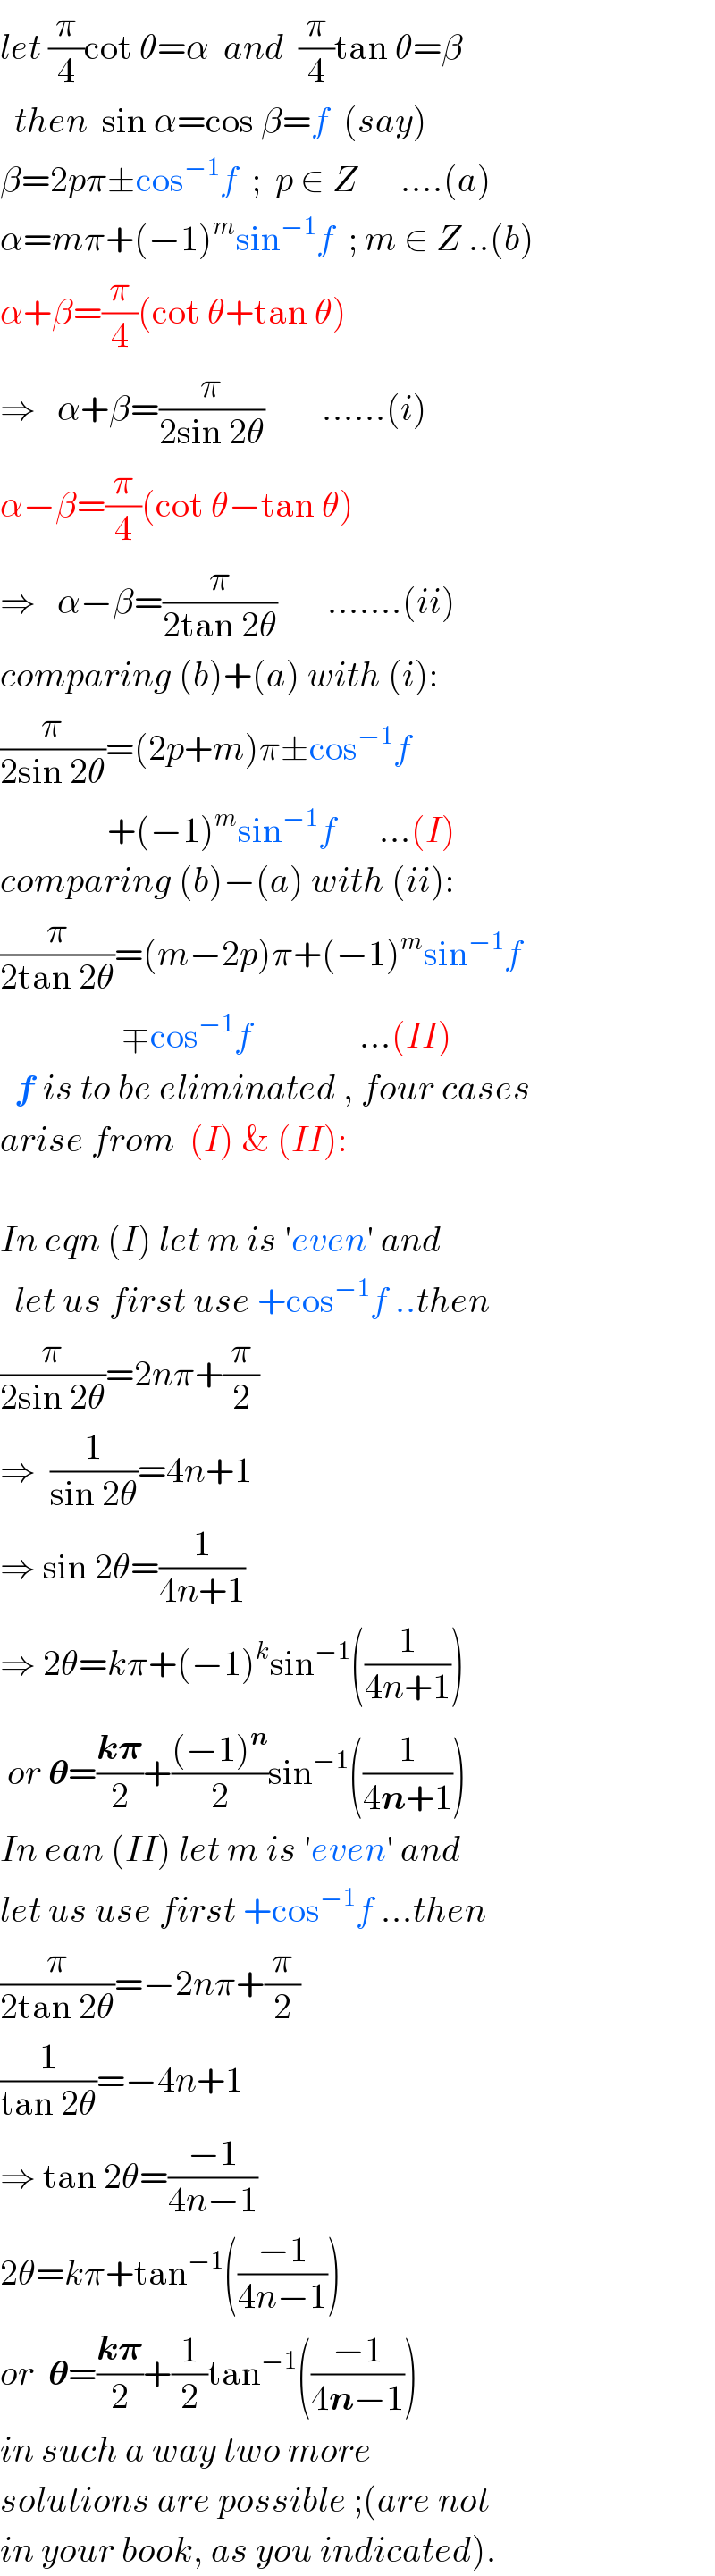 let (π/4)cot θ=α  and  (π/4)tan θ=β    then  sin α=cos β=f  (say)  β=2pπ±cos^(−1) f  ;  p ∈ Z      ....(a)  α=mπ+(−1)^m sin^(−1) f  ; m ∈ Z ..(b)  α+β=(π/4)(cot θ+tan θ)  ⇒   α+β=(π/(2sin 2θ))        ......(i)  α−β=(π/4)(cot θ−tan θ)  ⇒   α−β=(π/(2tan 2θ))       .......(ii)      comparing (b)+(a) with (i):  (π/(2sin 2θ))=(2p+m)π±cos^(−1) f                 +(−1)^m sin^(−1) f      ...(I)  comparing (b)−(a) with (ii):  (π/(2tan 2θ))=(m−2p)π+(−1)^m sin^(−1) f                   ∓cos^(−1) f               ...(II)    f is to be eliminated , four cases  arise from  (I) & (II):    In eqn (I) let m is ′even′ and    let us first use +cos^(−1) f ..then  (π/(2sin 2θ))=2nπ+(π/2)  ⇒  (1/(sin 2θ))=4n+1  ⇒ sin 2θ=(1/(4n+1))  ⇒ 2θ=kπ+(−1)^k sin^(−1) ((1/(4n+1)))   or 𝛉=((k𝛑)/2)+(((−1)^n )/2)sin^(−1) ((1/(4n+1)))  In ean (II) let m is ′even′ and  let us use first +cos^(−1) f ...then  (π/(2tan 2θ))=−2nπ+(π/2)  (1/(tan 2θ))=−4n+1  ⇒ tan 2θ=((−1)/(4n−1))  2θ=kπ+tan^(−1) (((−1)/(4n−1)))  or  𝛉=((k𝛑)/2)+(1/2)tan^(−1) (((−1)/(4n−1)))   in such a way two more  solutions are possible ;(are not  in your book, as you indicated).  